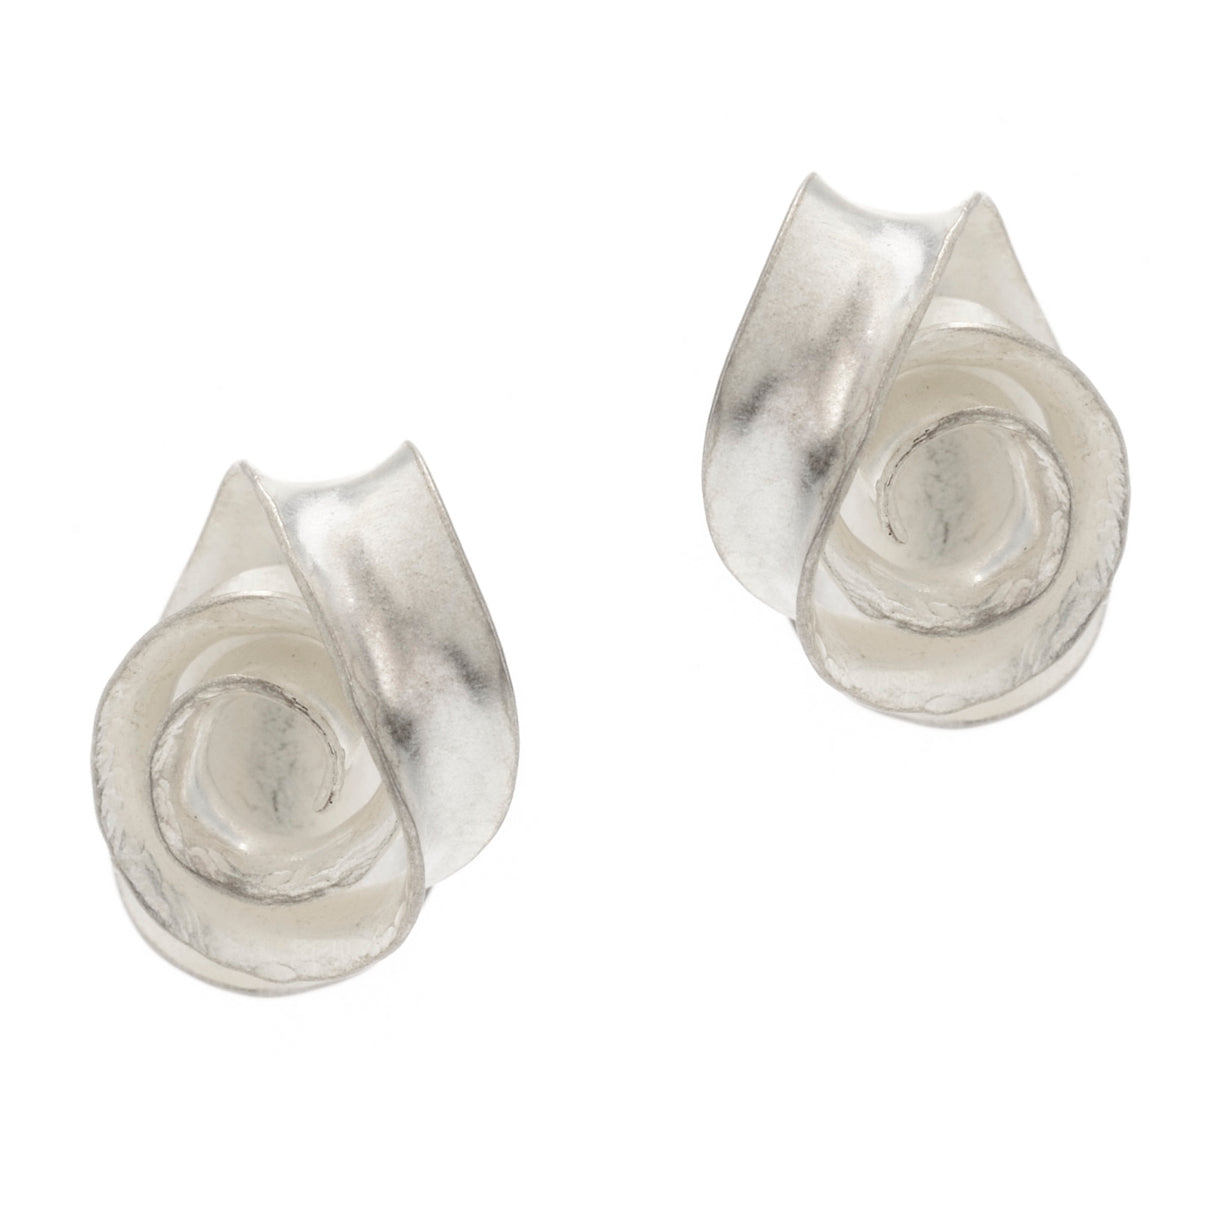 A peir of delicate swirl earrings made from recycled sterling silver. Each stud is made from a single piece of silver, with a spiralloing ribbon of metal twisting so that it lies flat against a curved backing.